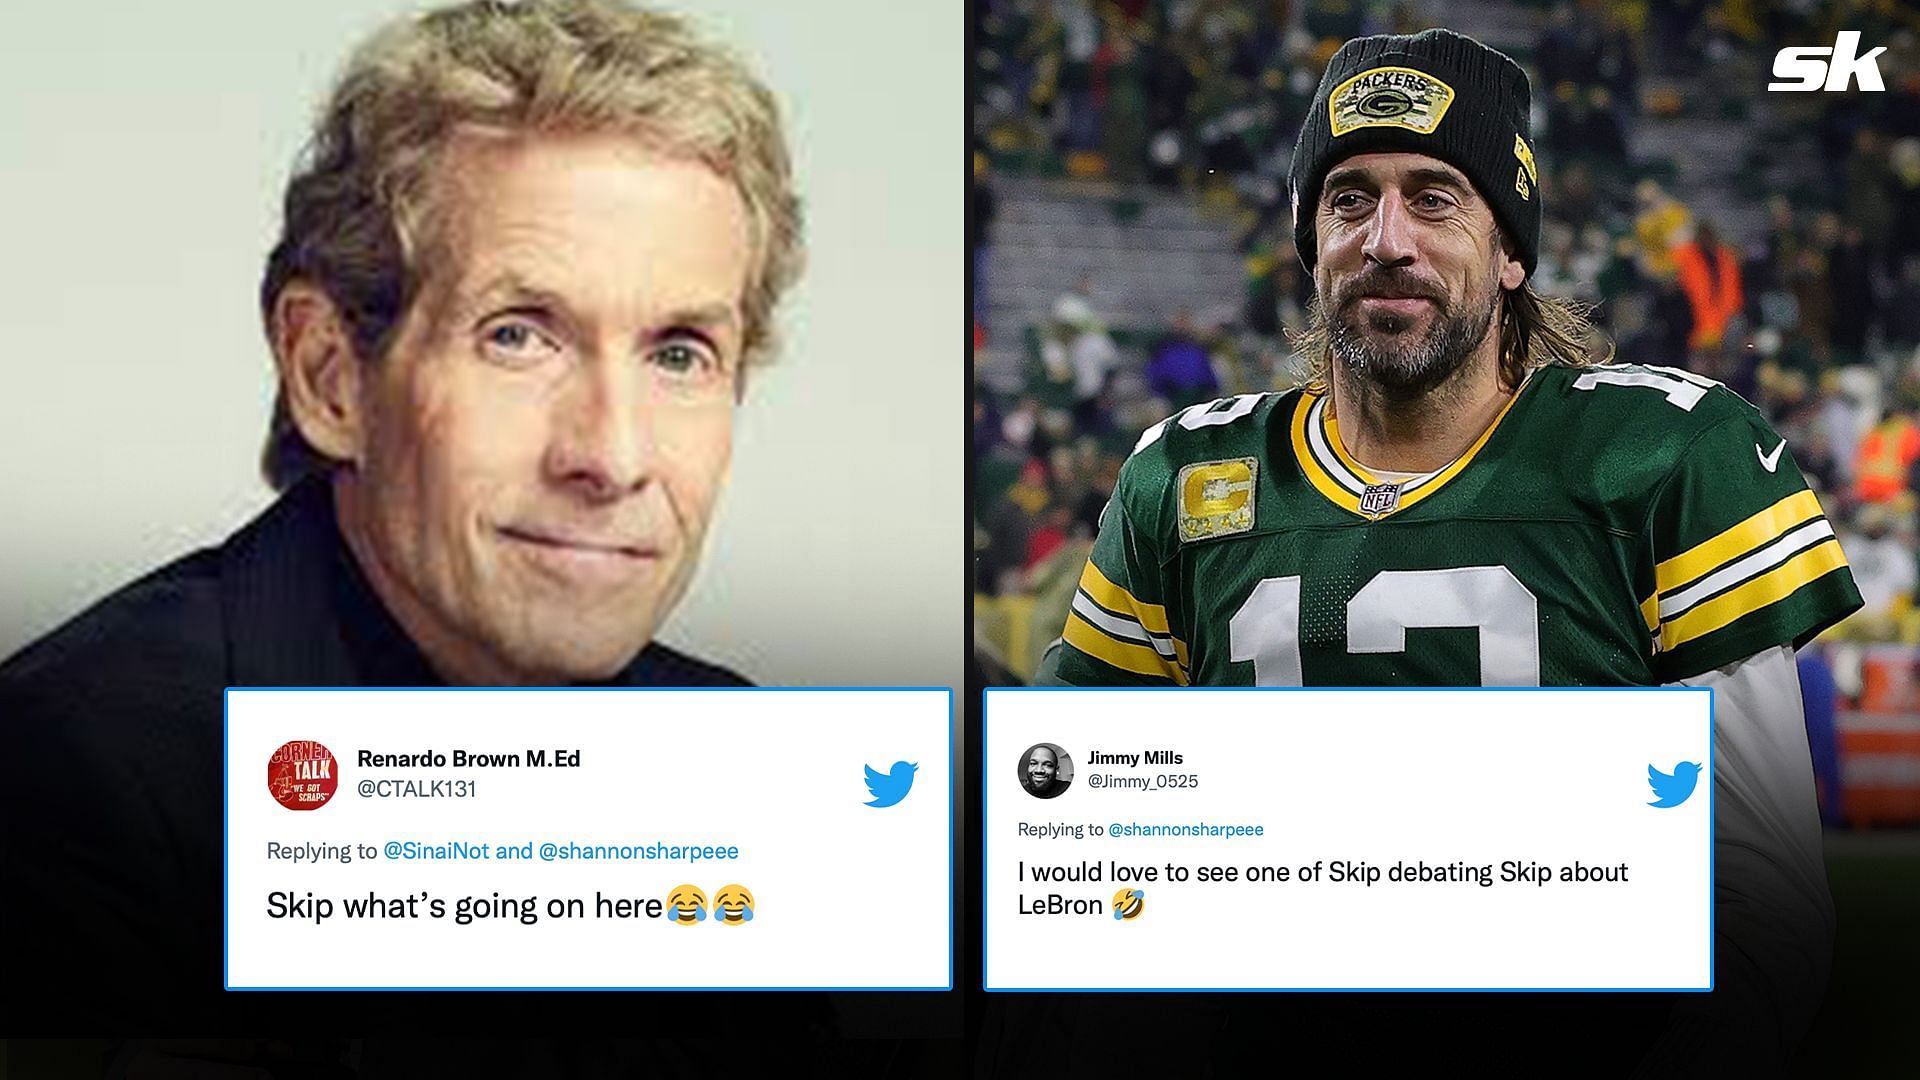 NFL fans on Twitter react to video of Skip Bayless debating himself. The subject was Aaron Rodgers.